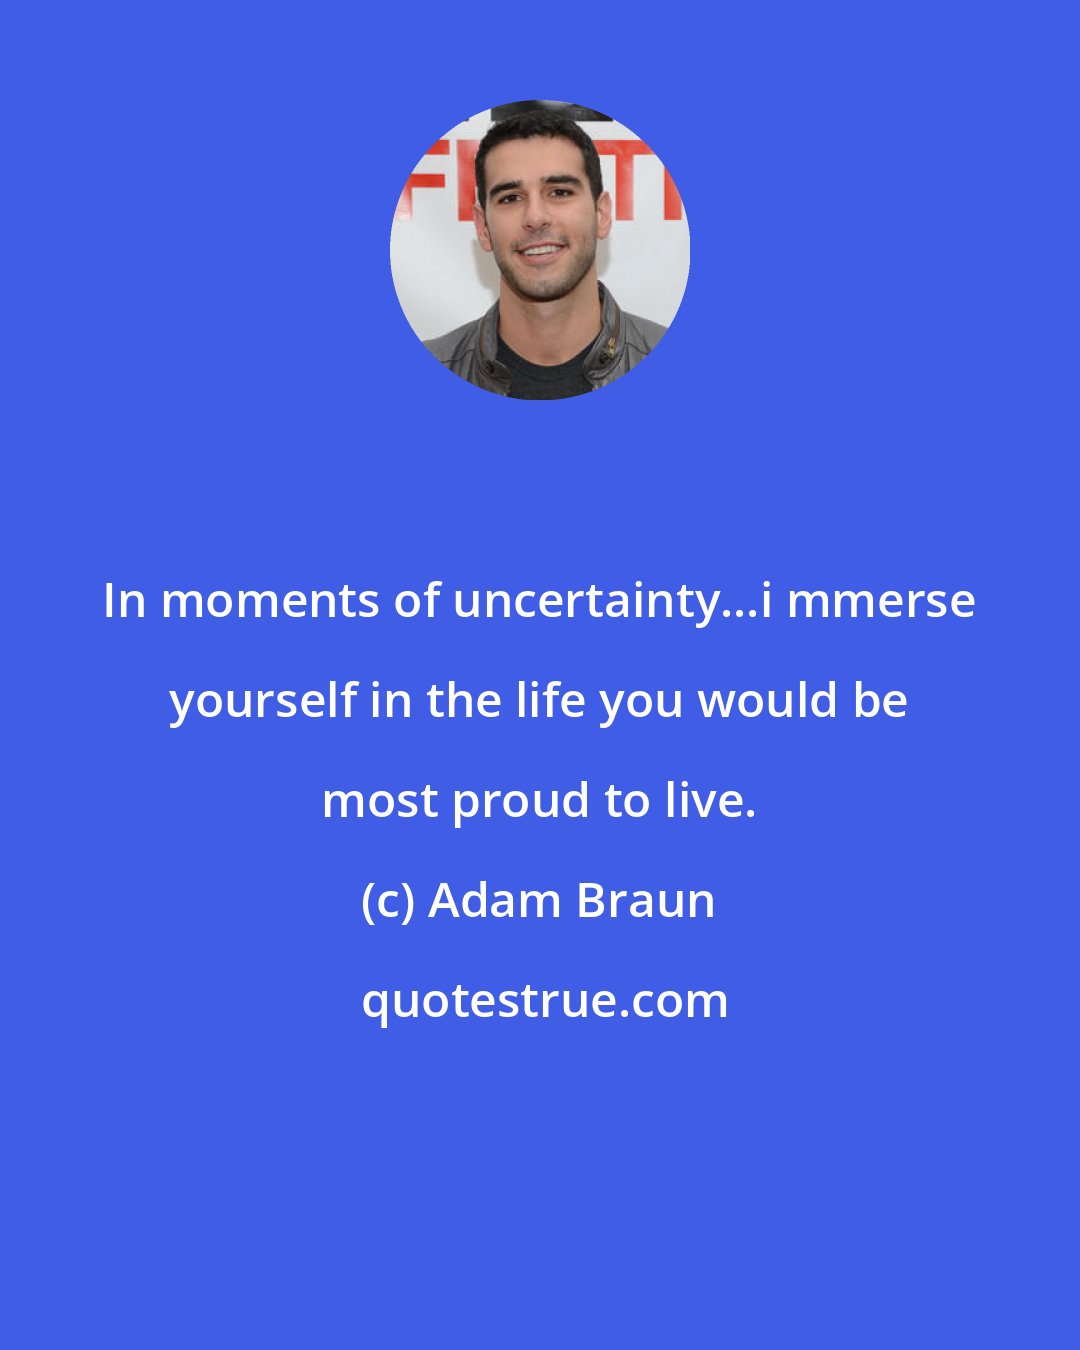 Adam Braun: In moments of uncertainty...i mmerse yourself in the life you would be most proud to live.